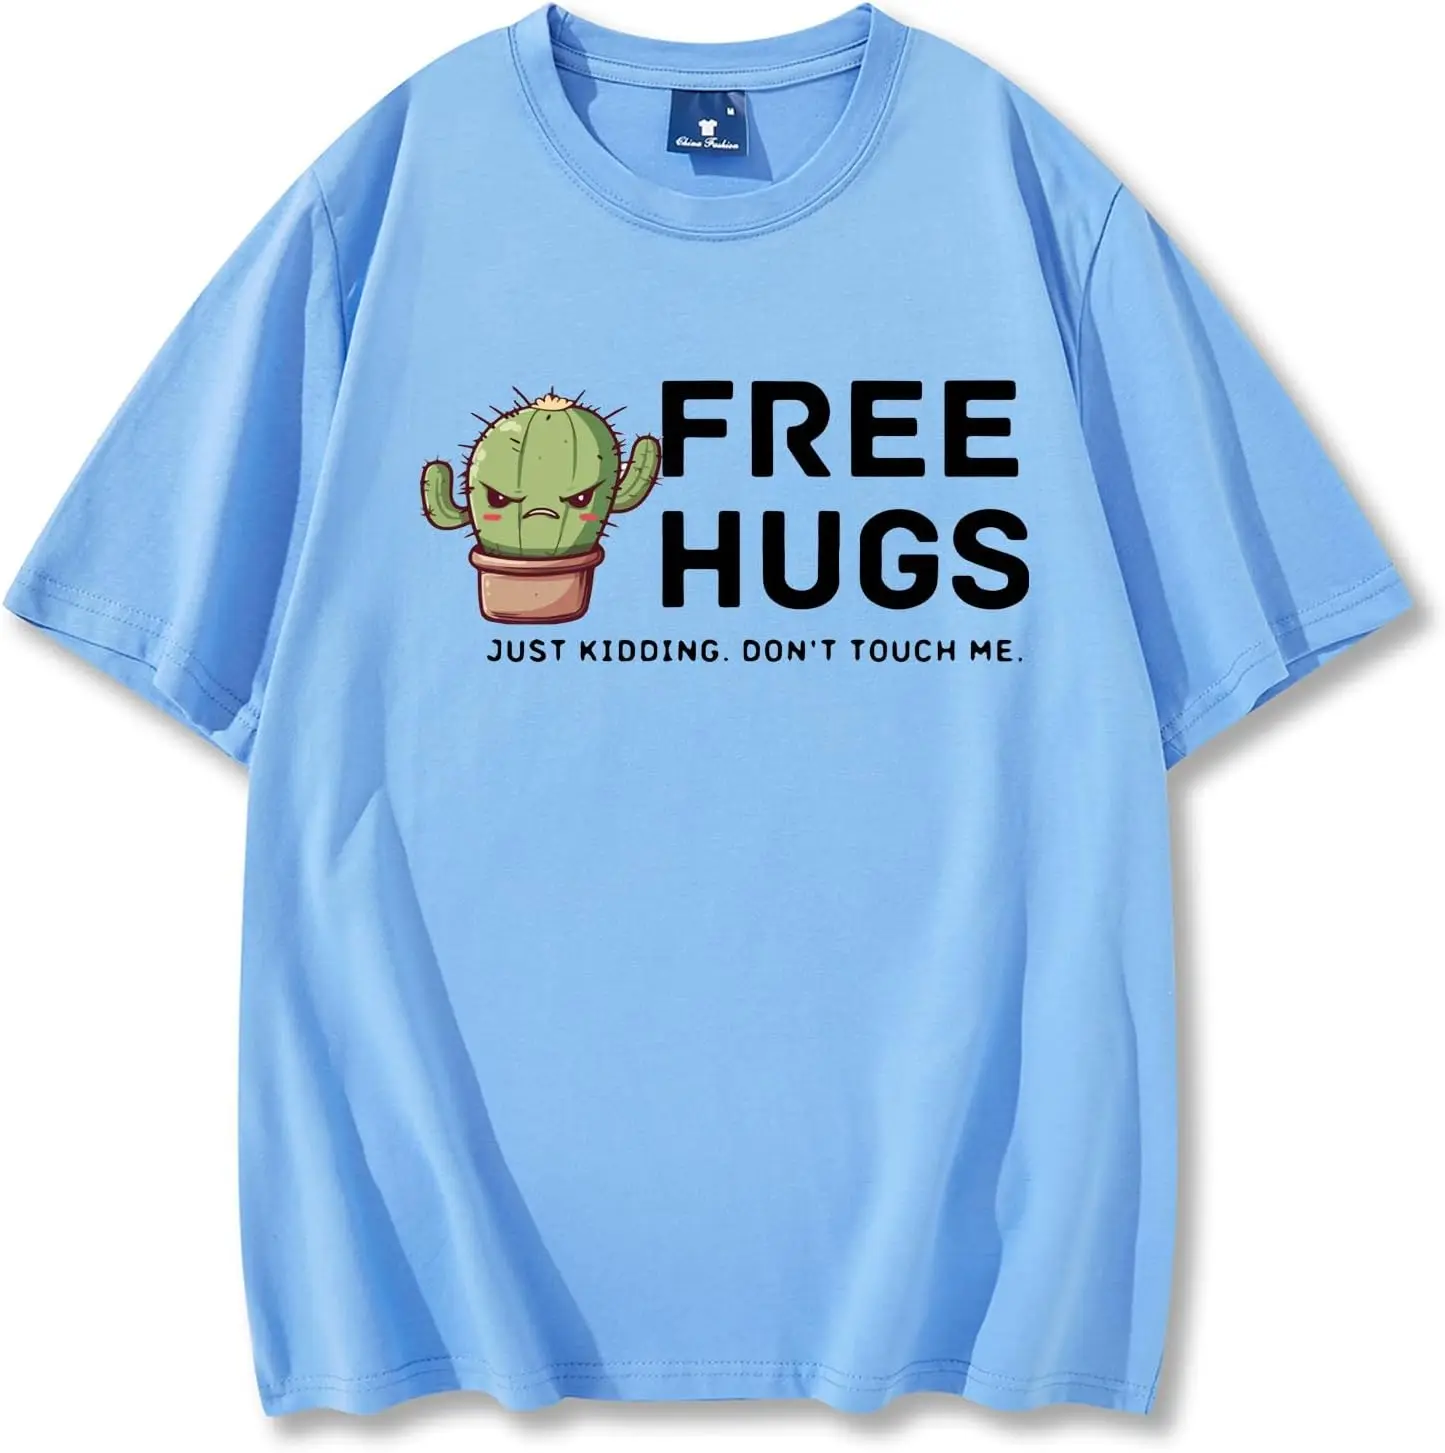 

Free Hugs Just Kidding Don't Touch Me T Shirt for Women Funny Crew Neck Short Sleeve Shirts Summer Casual Graphic Tee